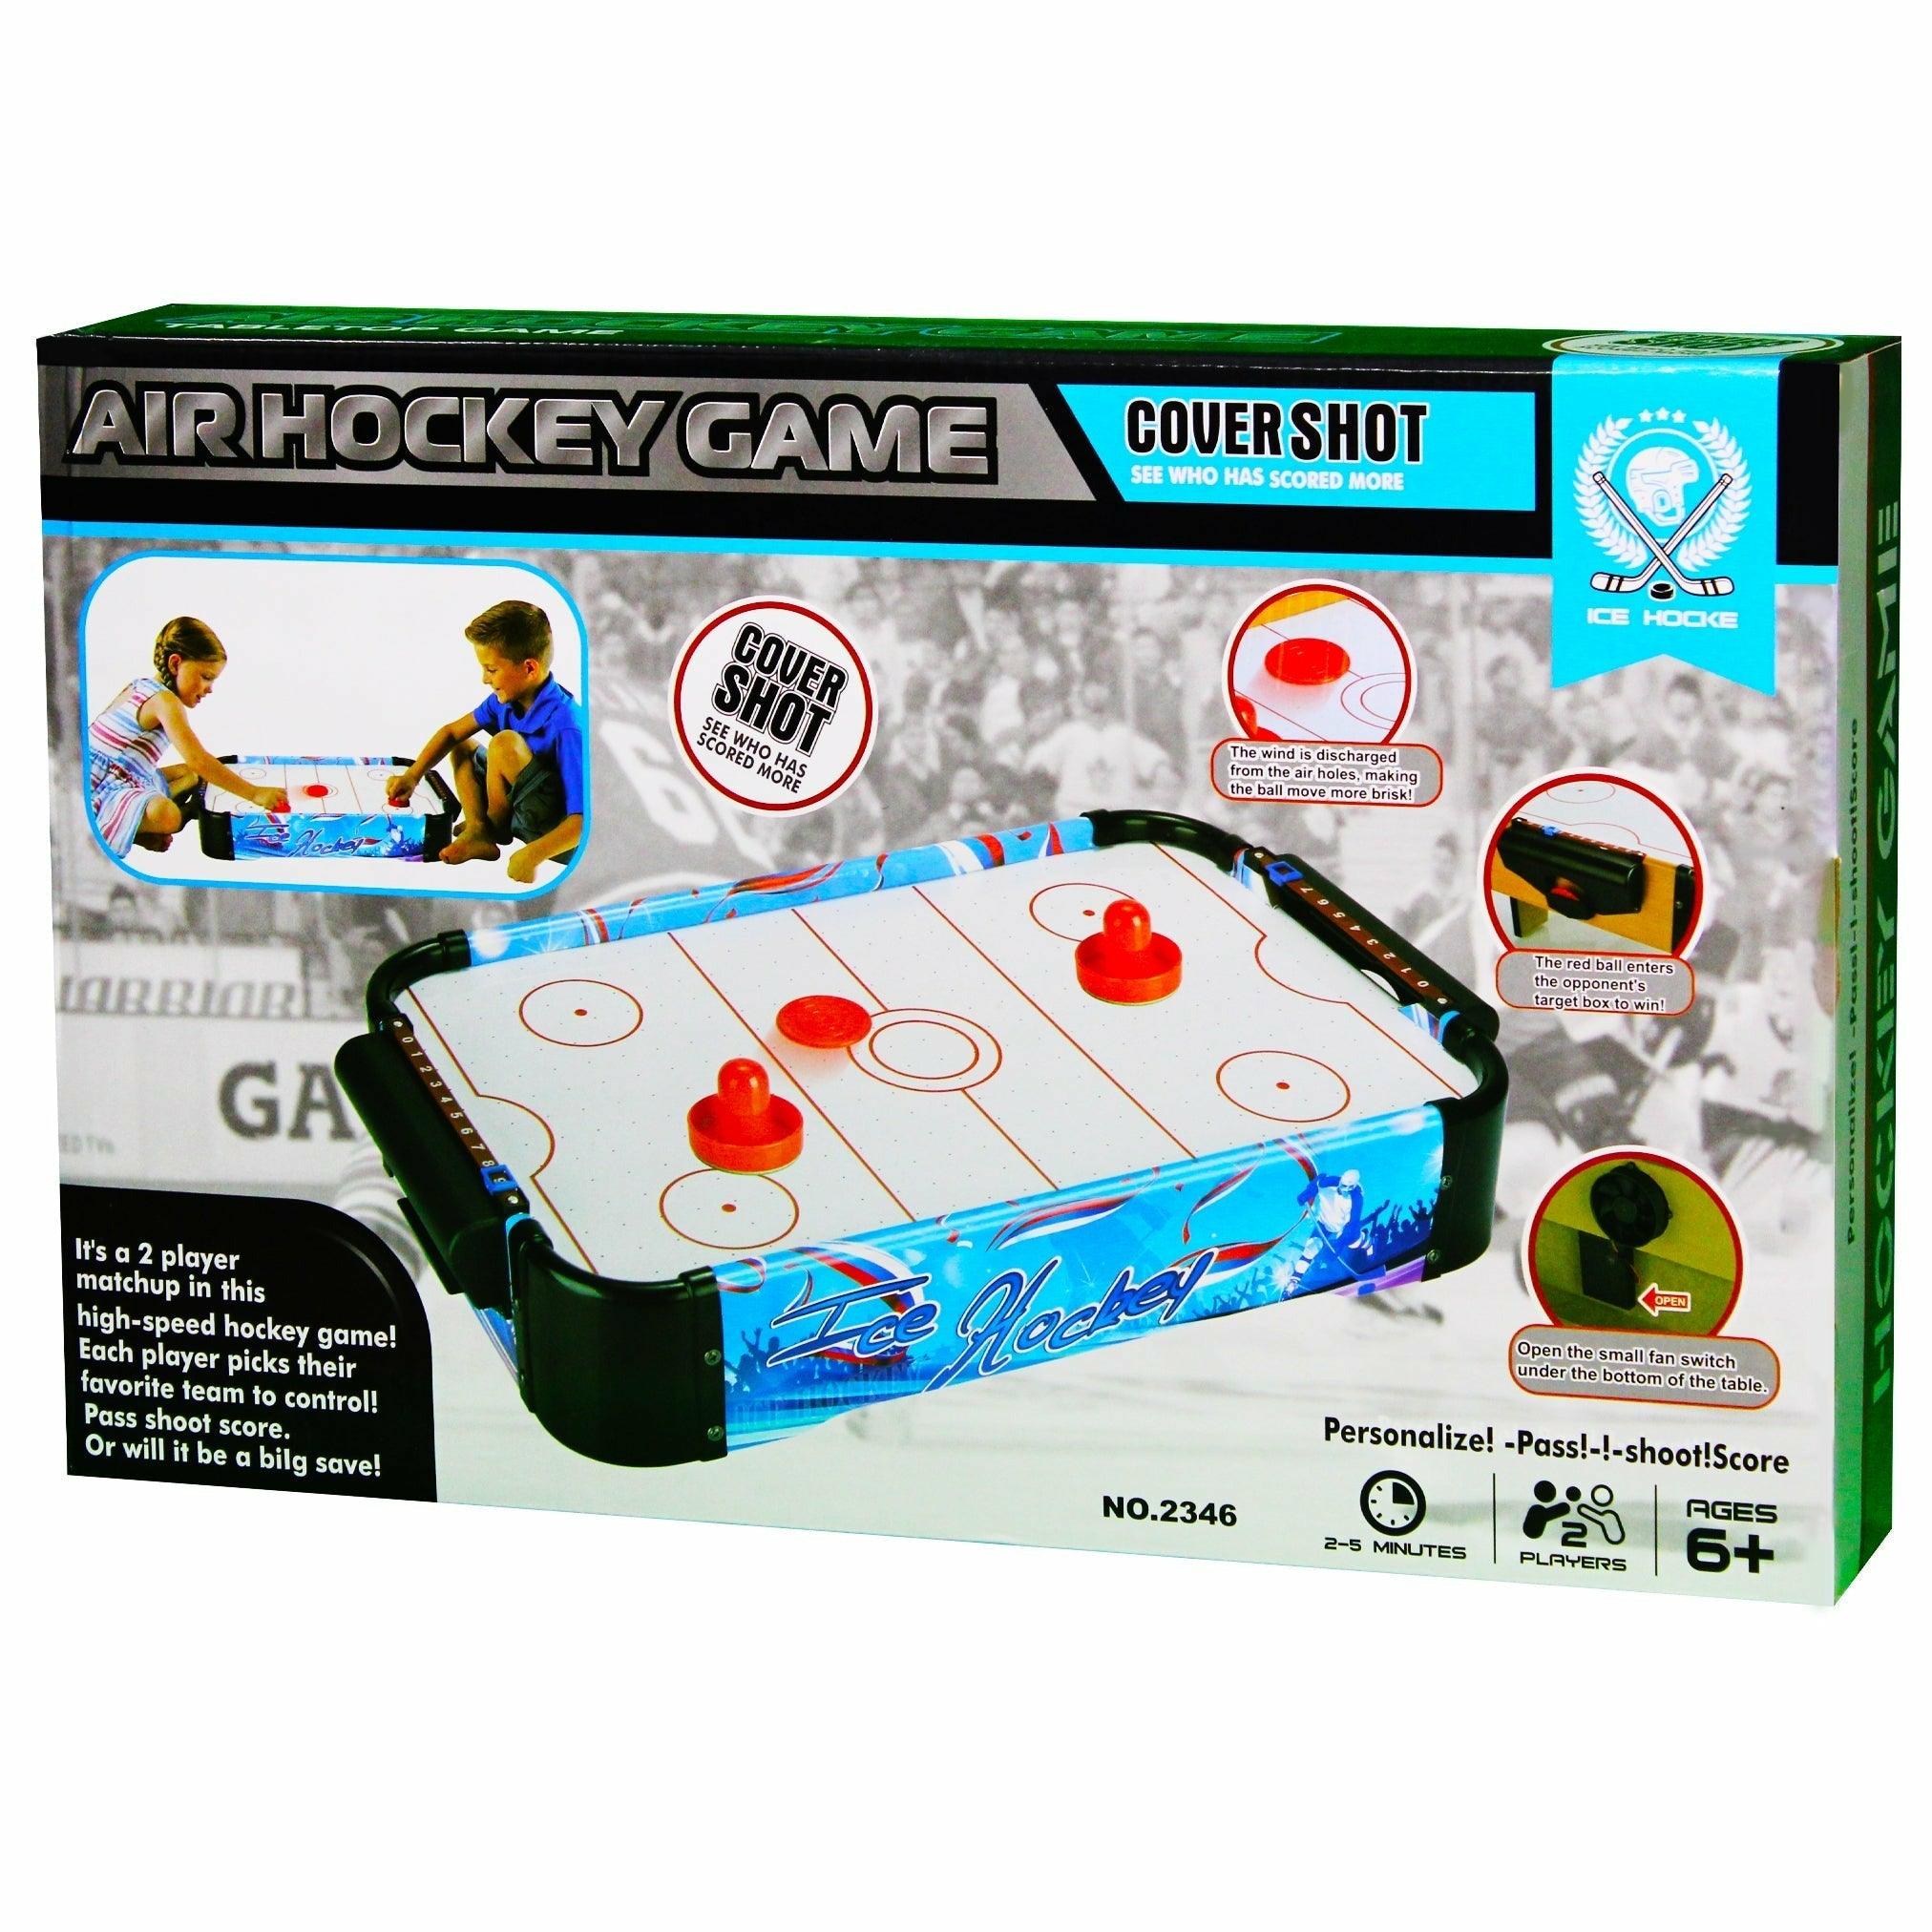 Air Hockey Game Cover Shot 2 Air Action Table Game Play Set - BumbleToys - 5-7 Years, Boys, Girls, Kids Sports & Balls, Toy House